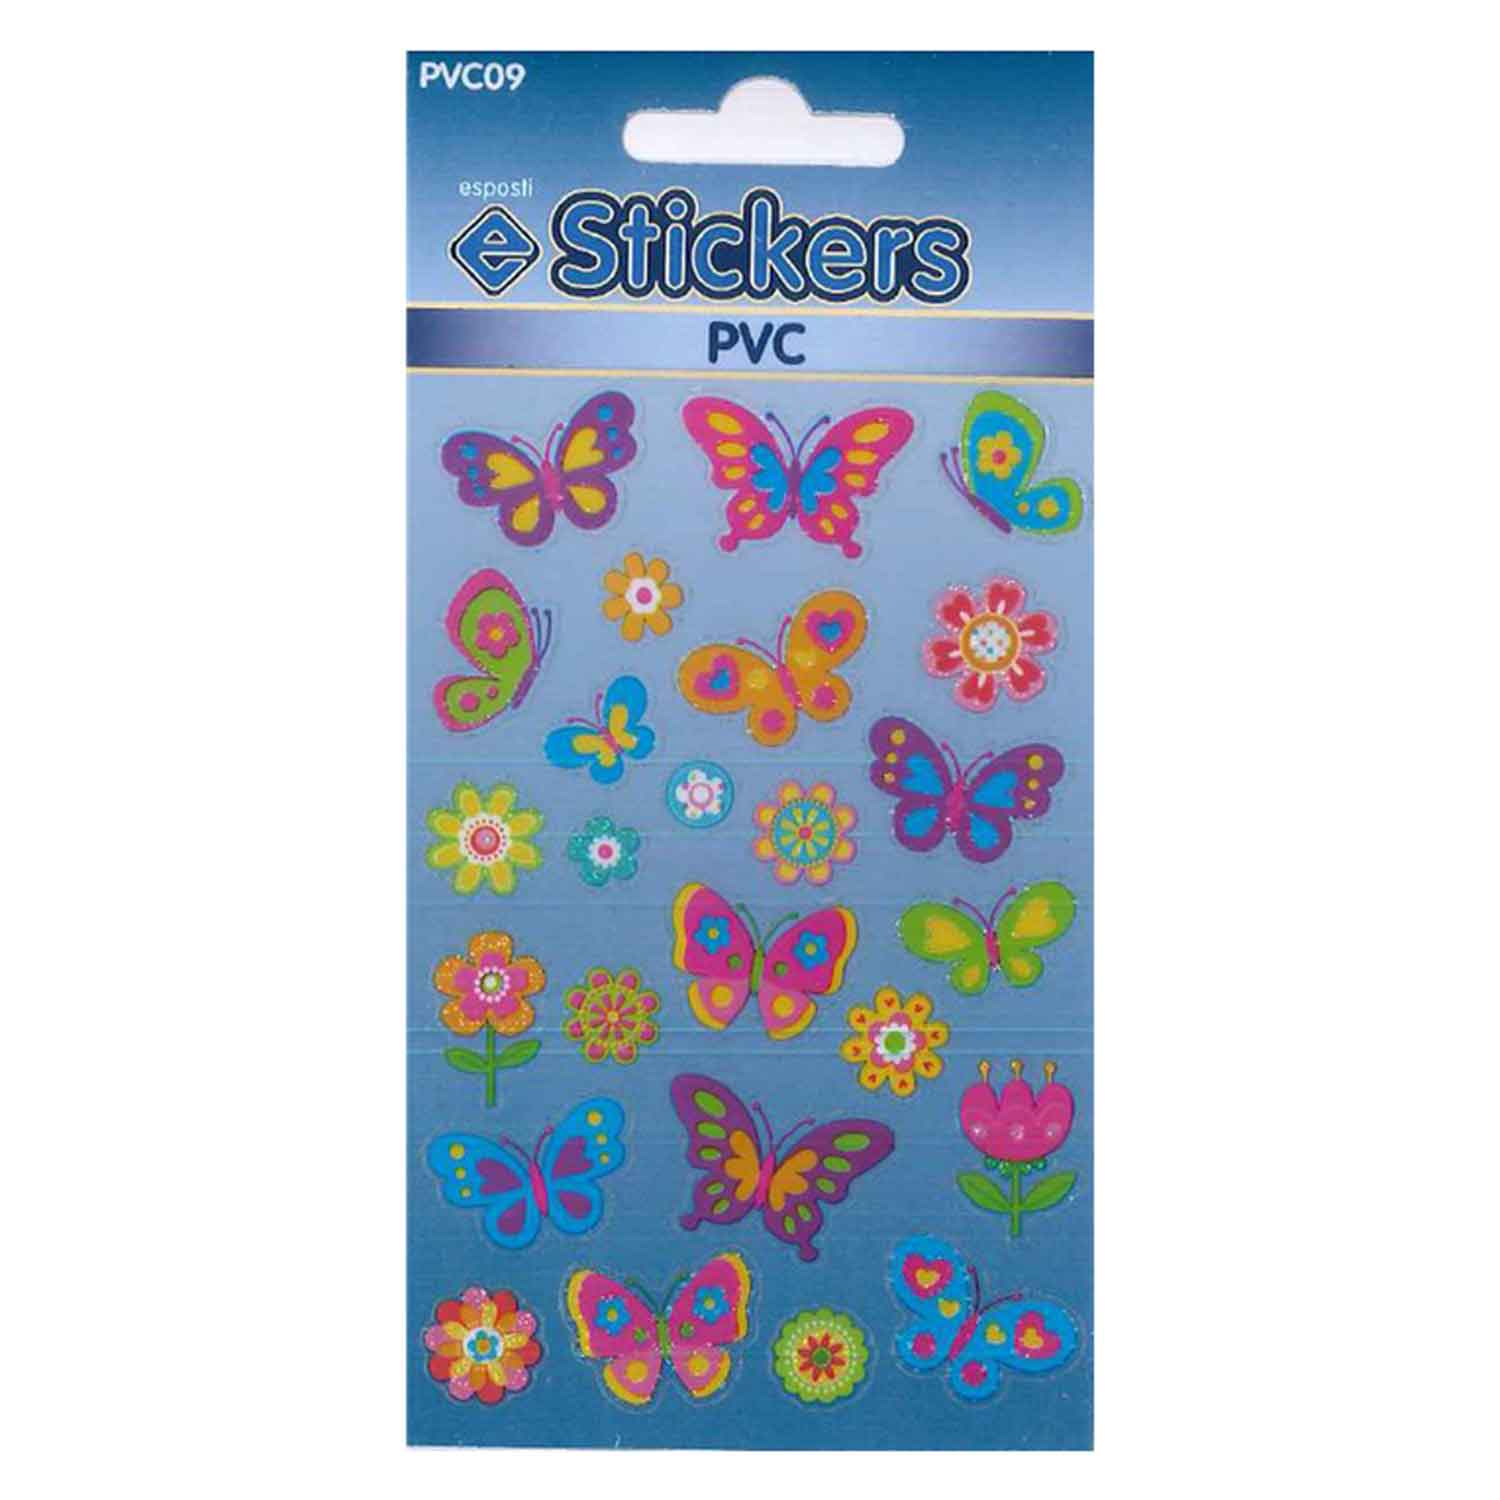 Butterflies & Flowers PVC Self Adhesive Novelty Stickers - Pack of 10